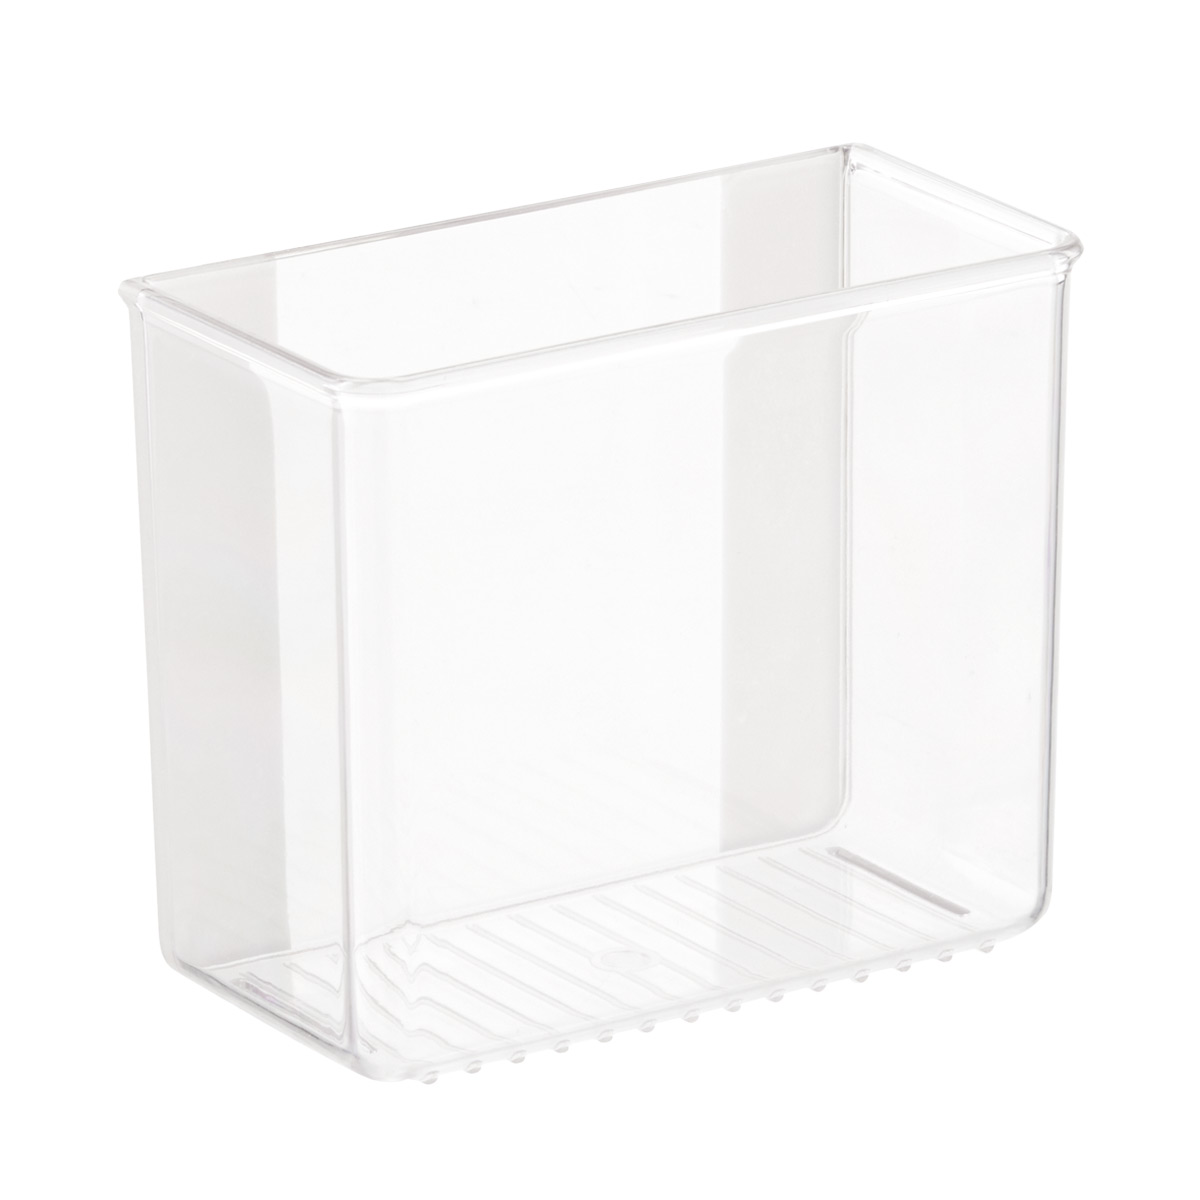 https://www.containerstore.com/catalogimages/314960/10071398-affixx-adhesive-organizer-b.jpg